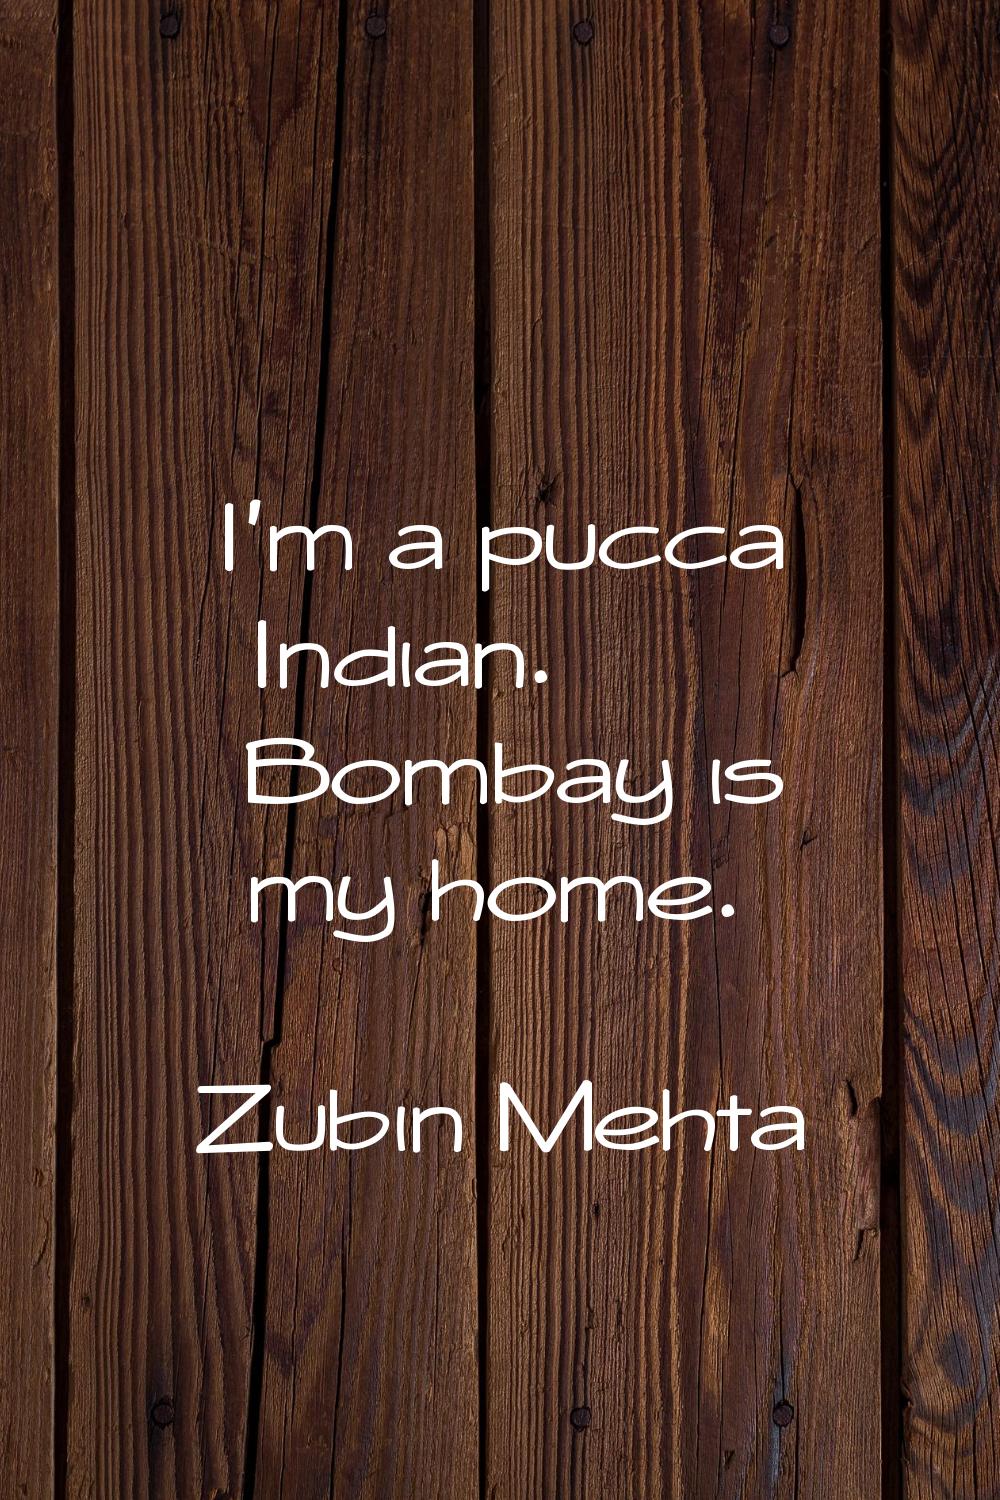 I'm a pucca Indian. Bombay is my home.